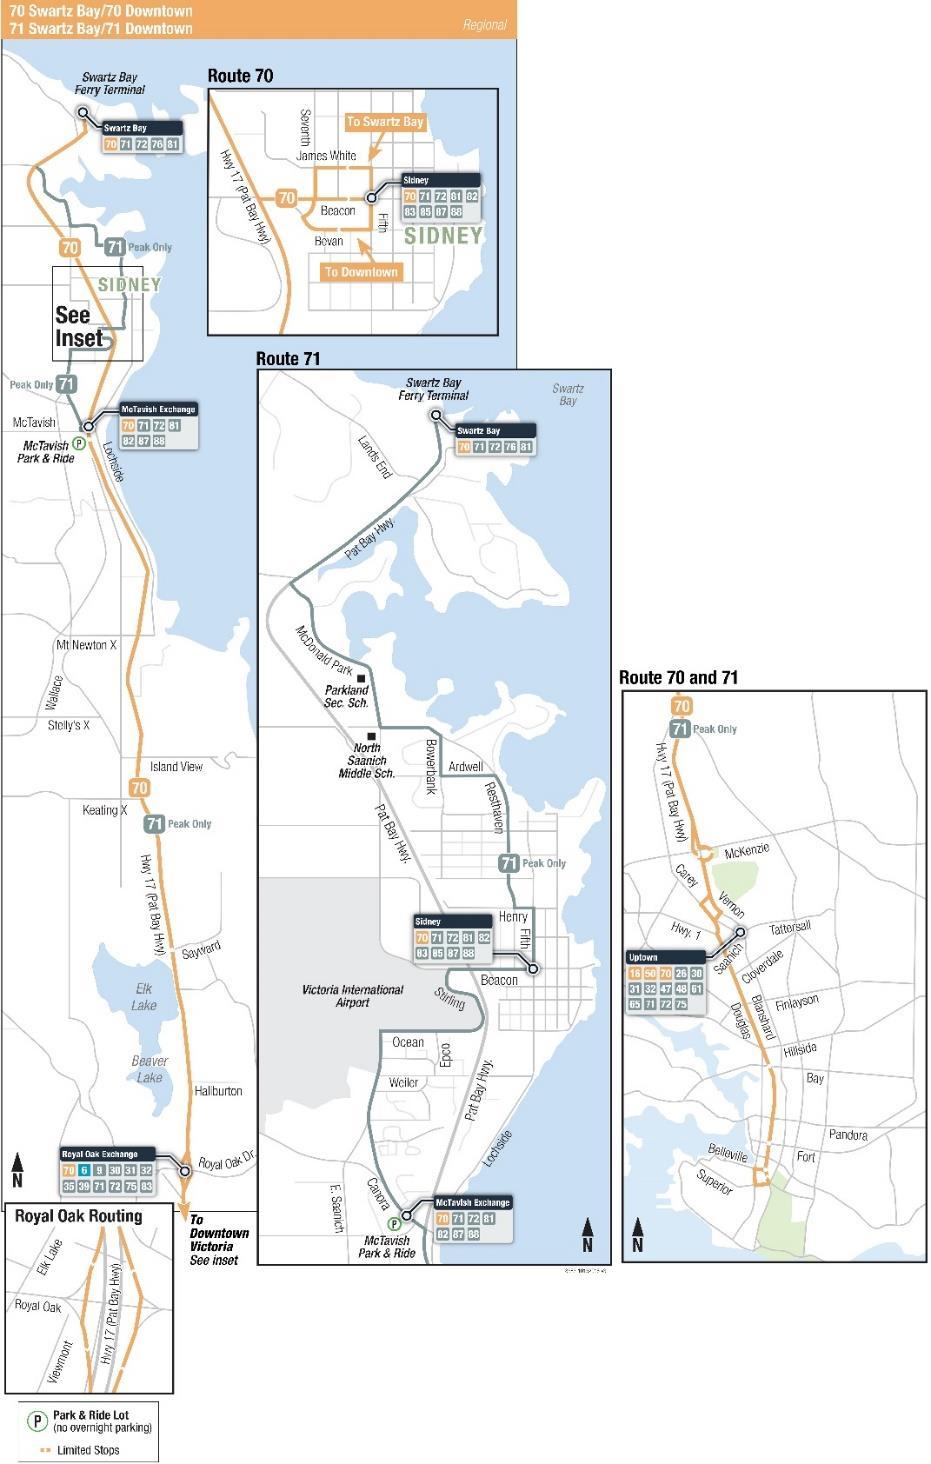 Routing Change Route 70/71 70/71 Downtown/Swartz Bay WINTER 2019 CHANGE: Effective January 2, 2019 The 70/71 Downtown/Swartz Bay will be re-routed around the west side of Uptown, circumventing